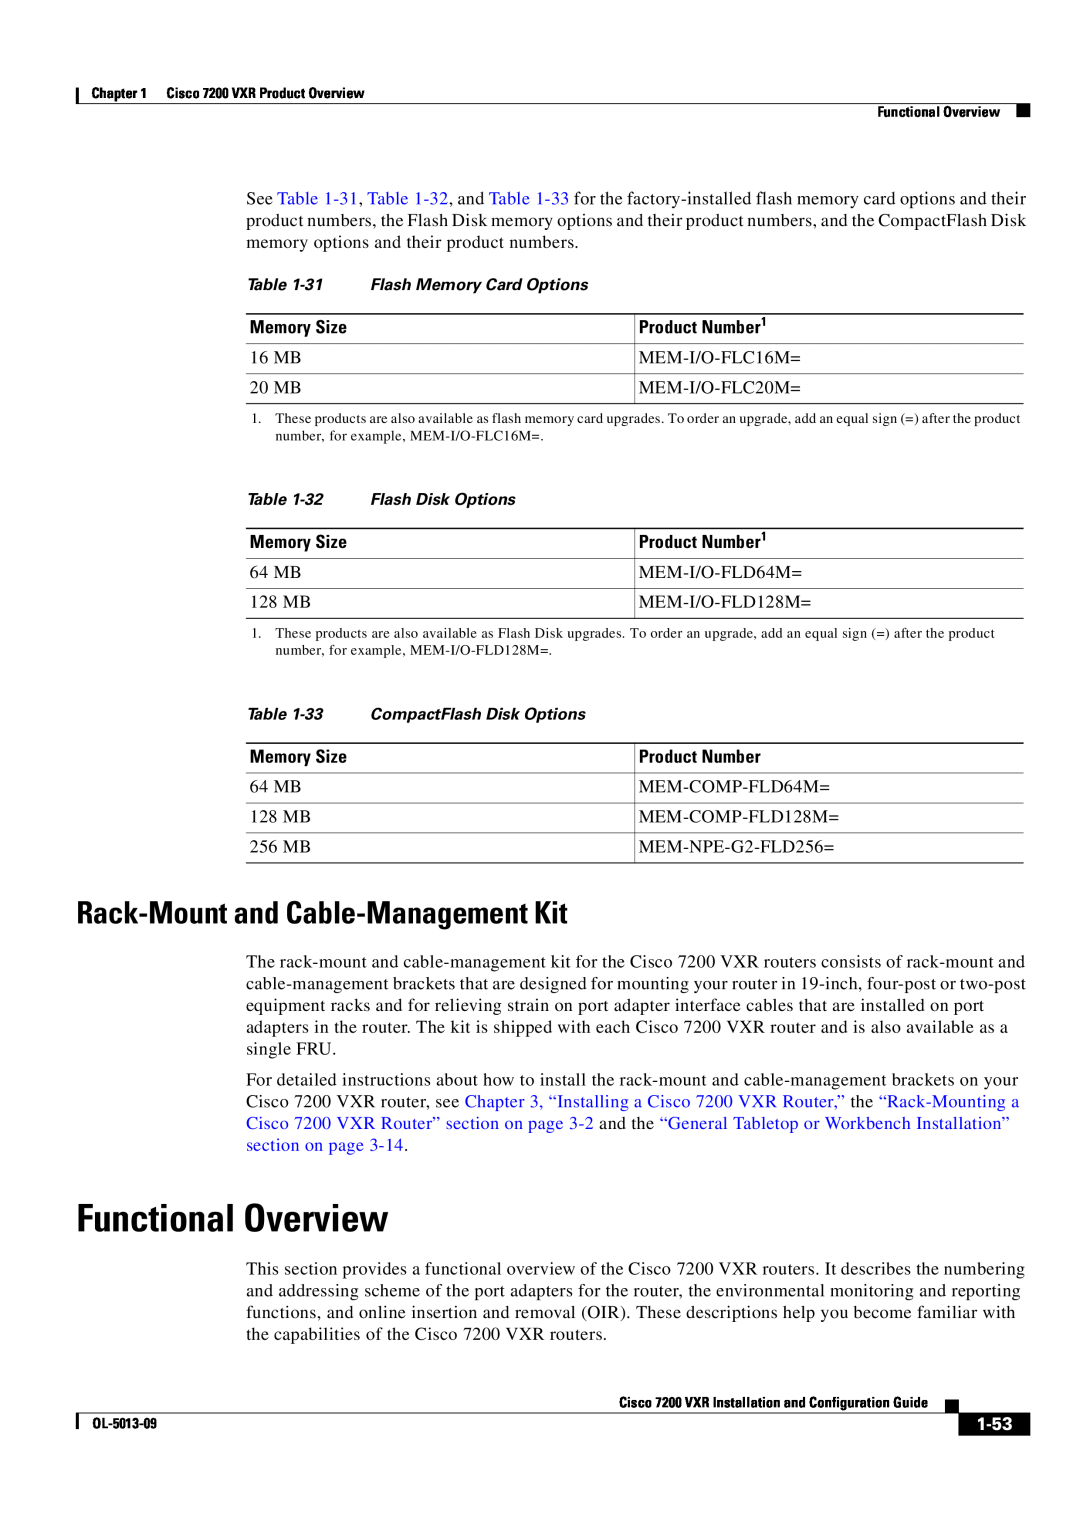 Cisco Systems 7200 VXR manual Functional Overview, Rack-Mount and Cable-Management Kit, 1-53 